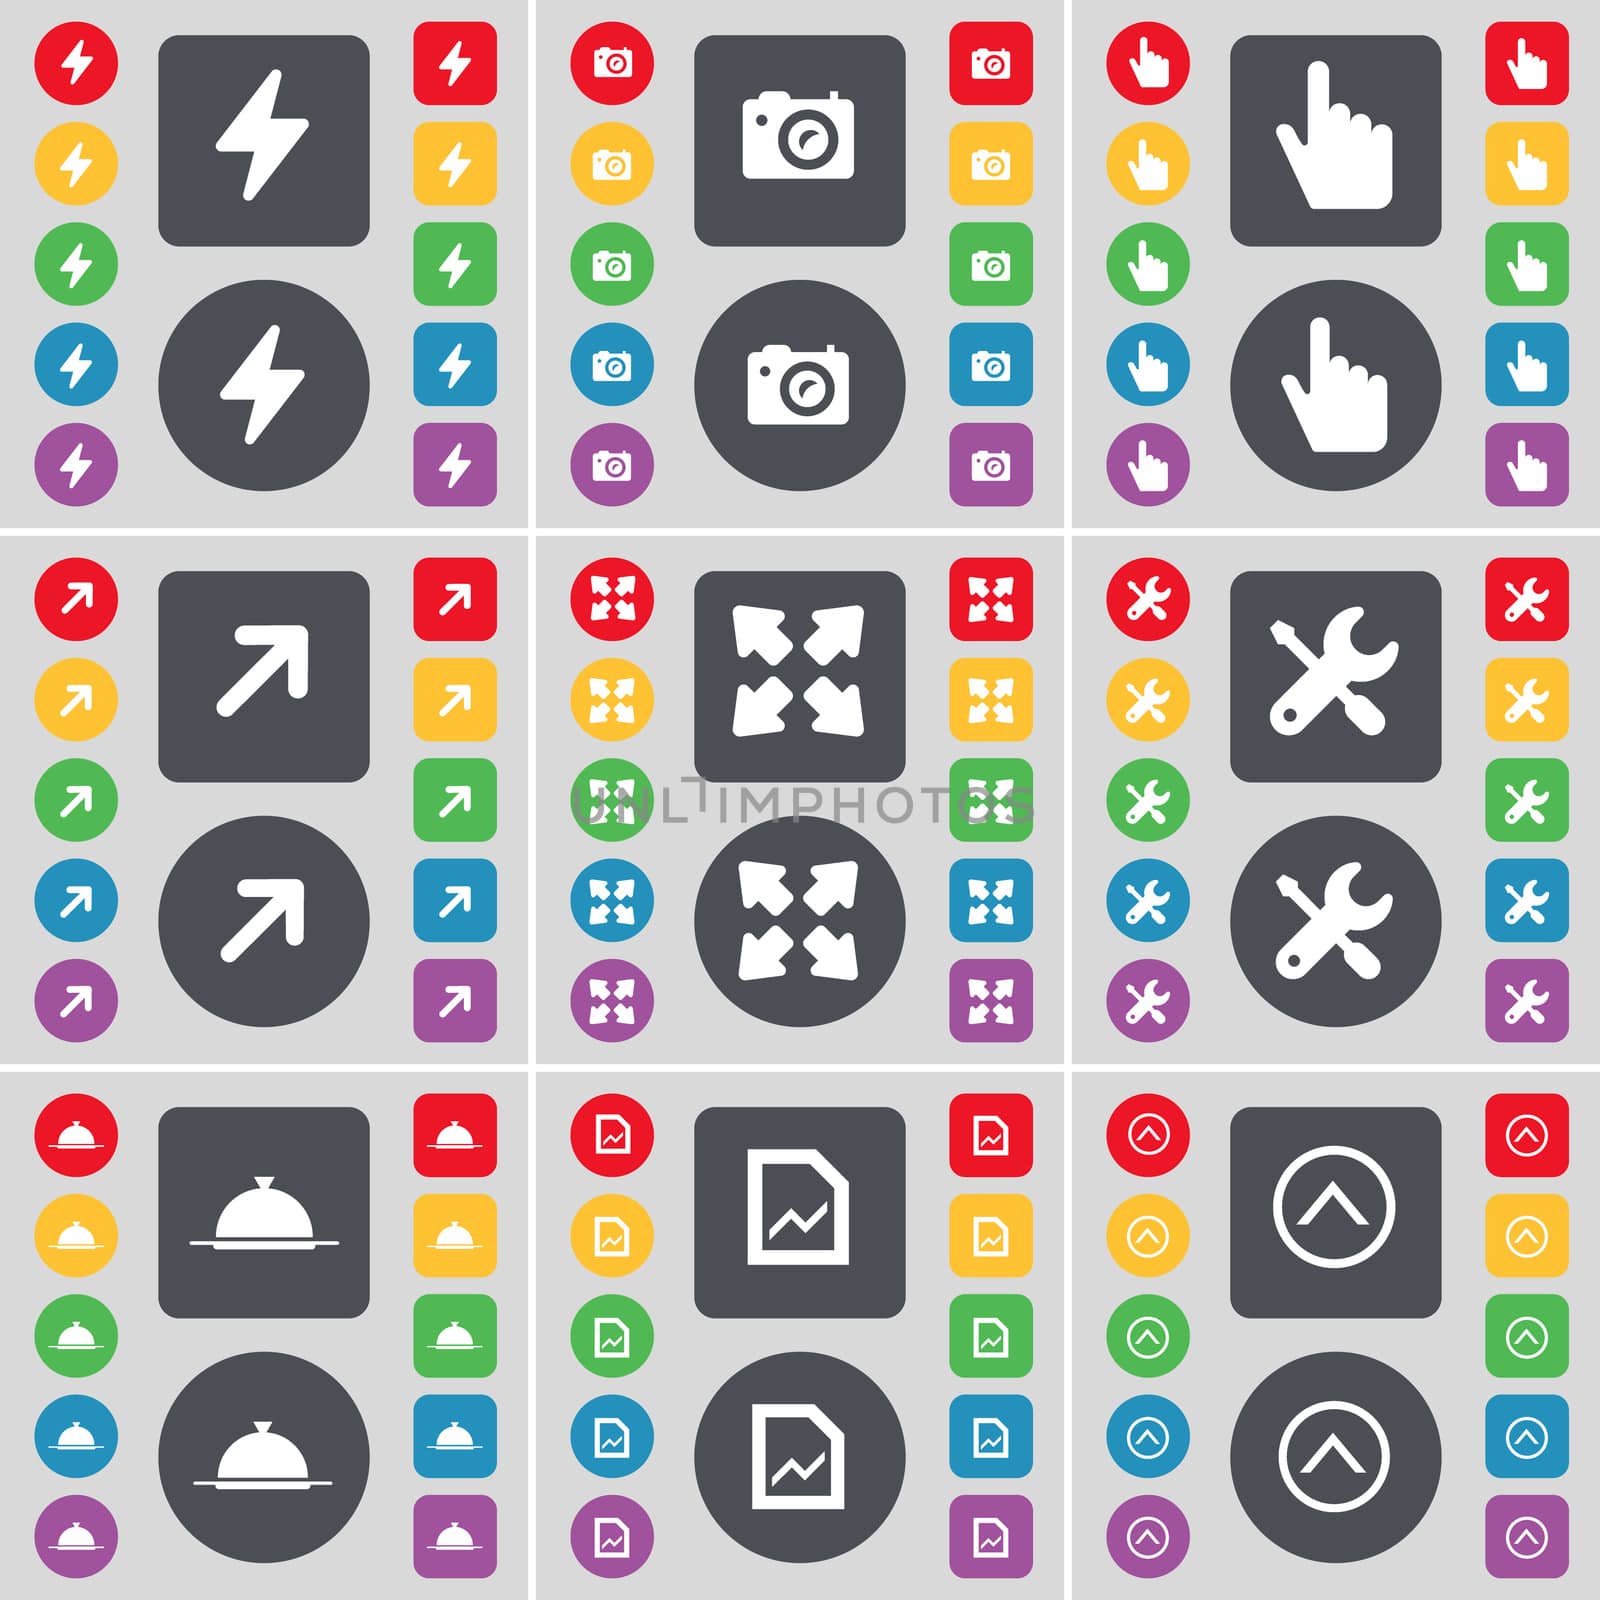 Flash, Camera, hand, Full screen, Wrench, Tray, Graph, Arrow up icon symbol. A large set of flat, colored buttons for your design. illustration